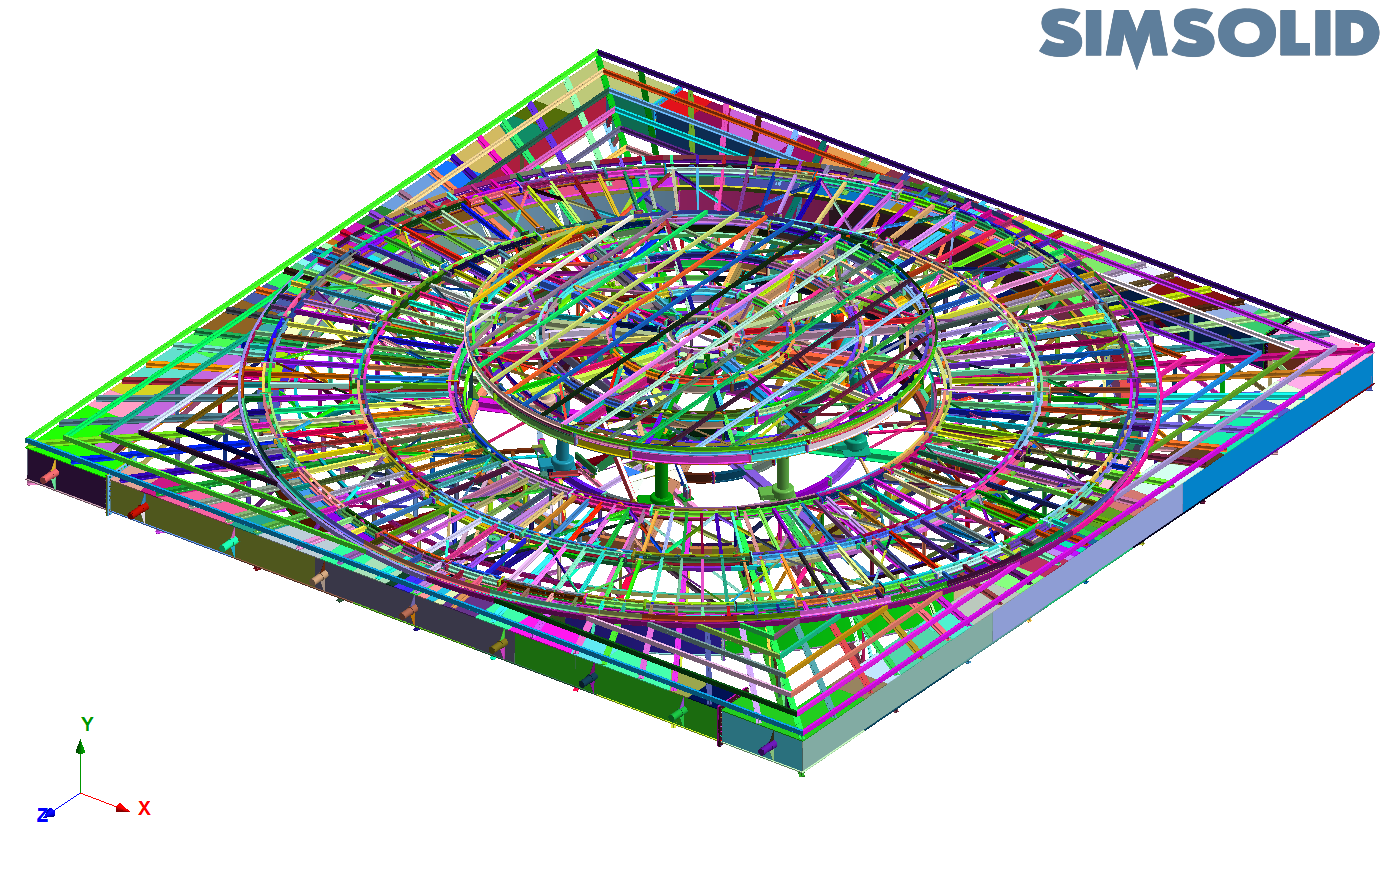 Large model analysis using Altair SimSolid